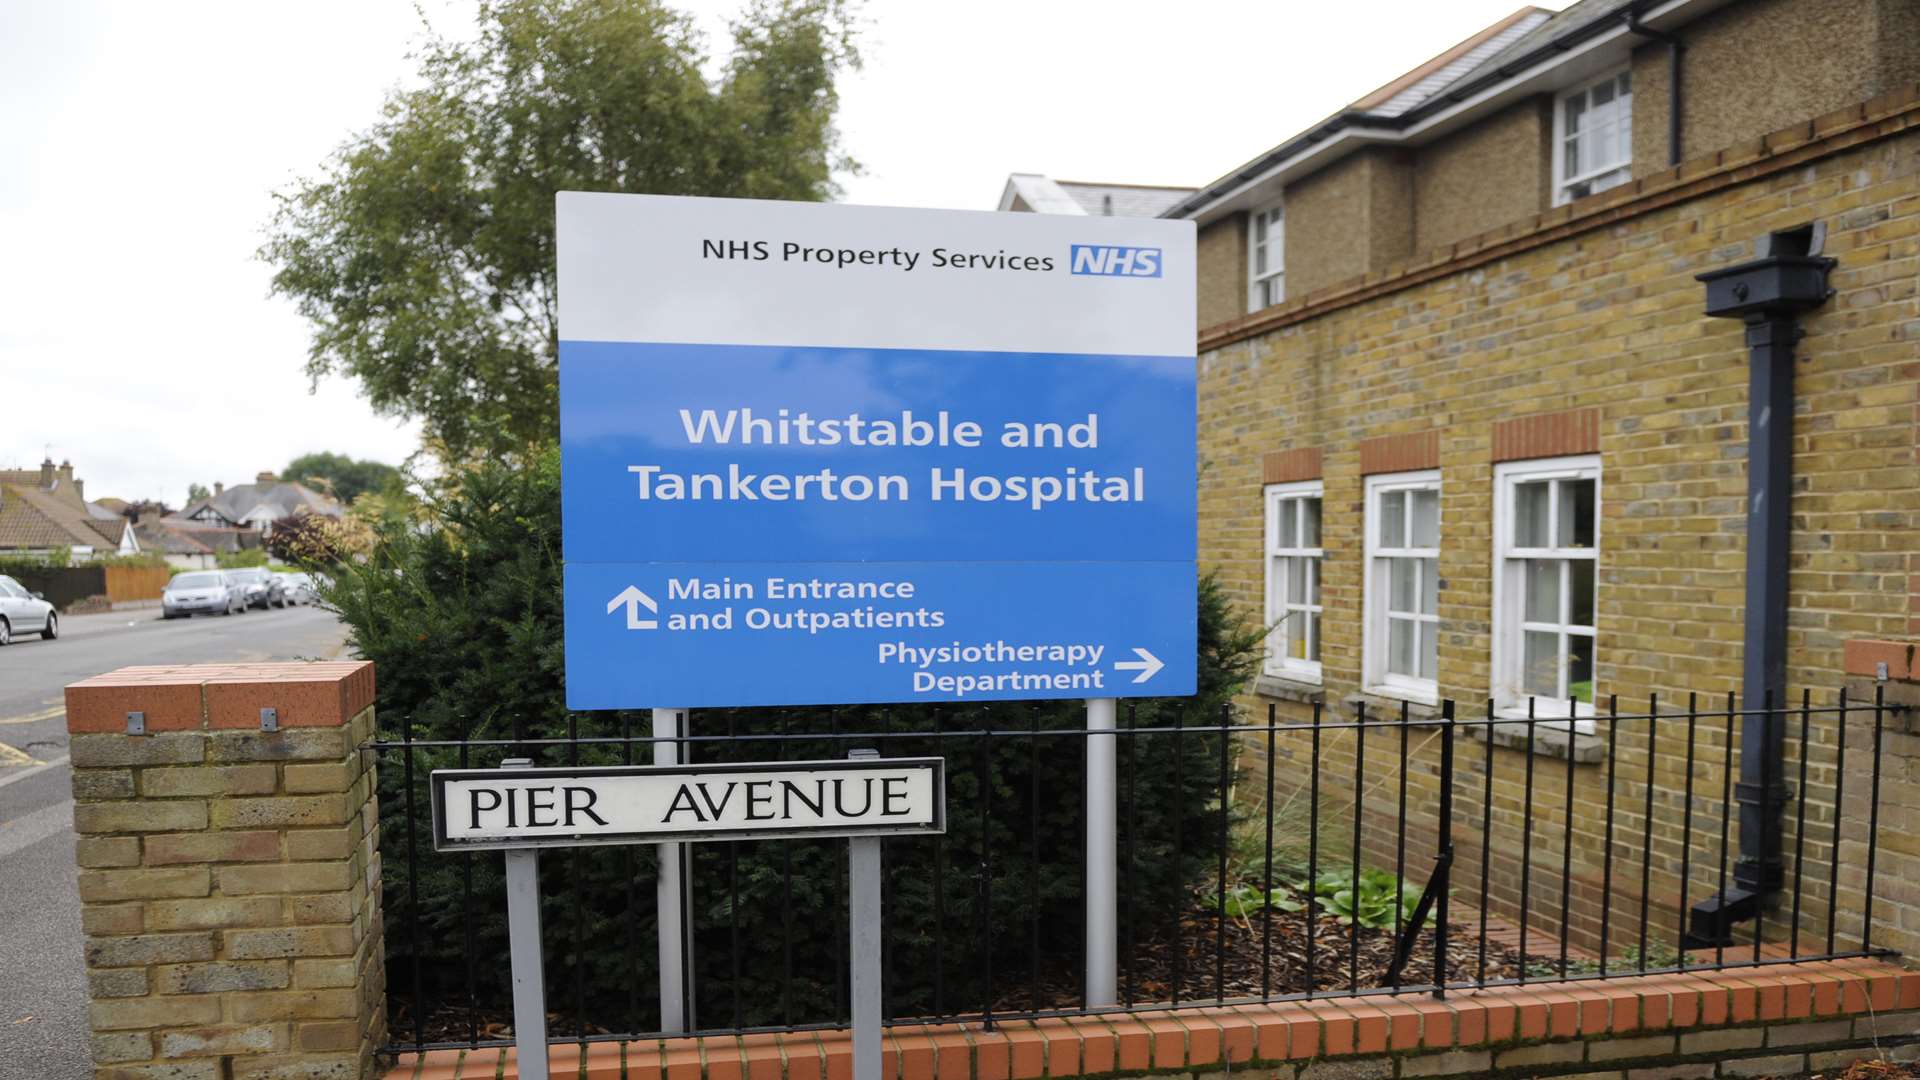 There's ‘no proposal’ to sell Whitstable and Tankerton Hospital